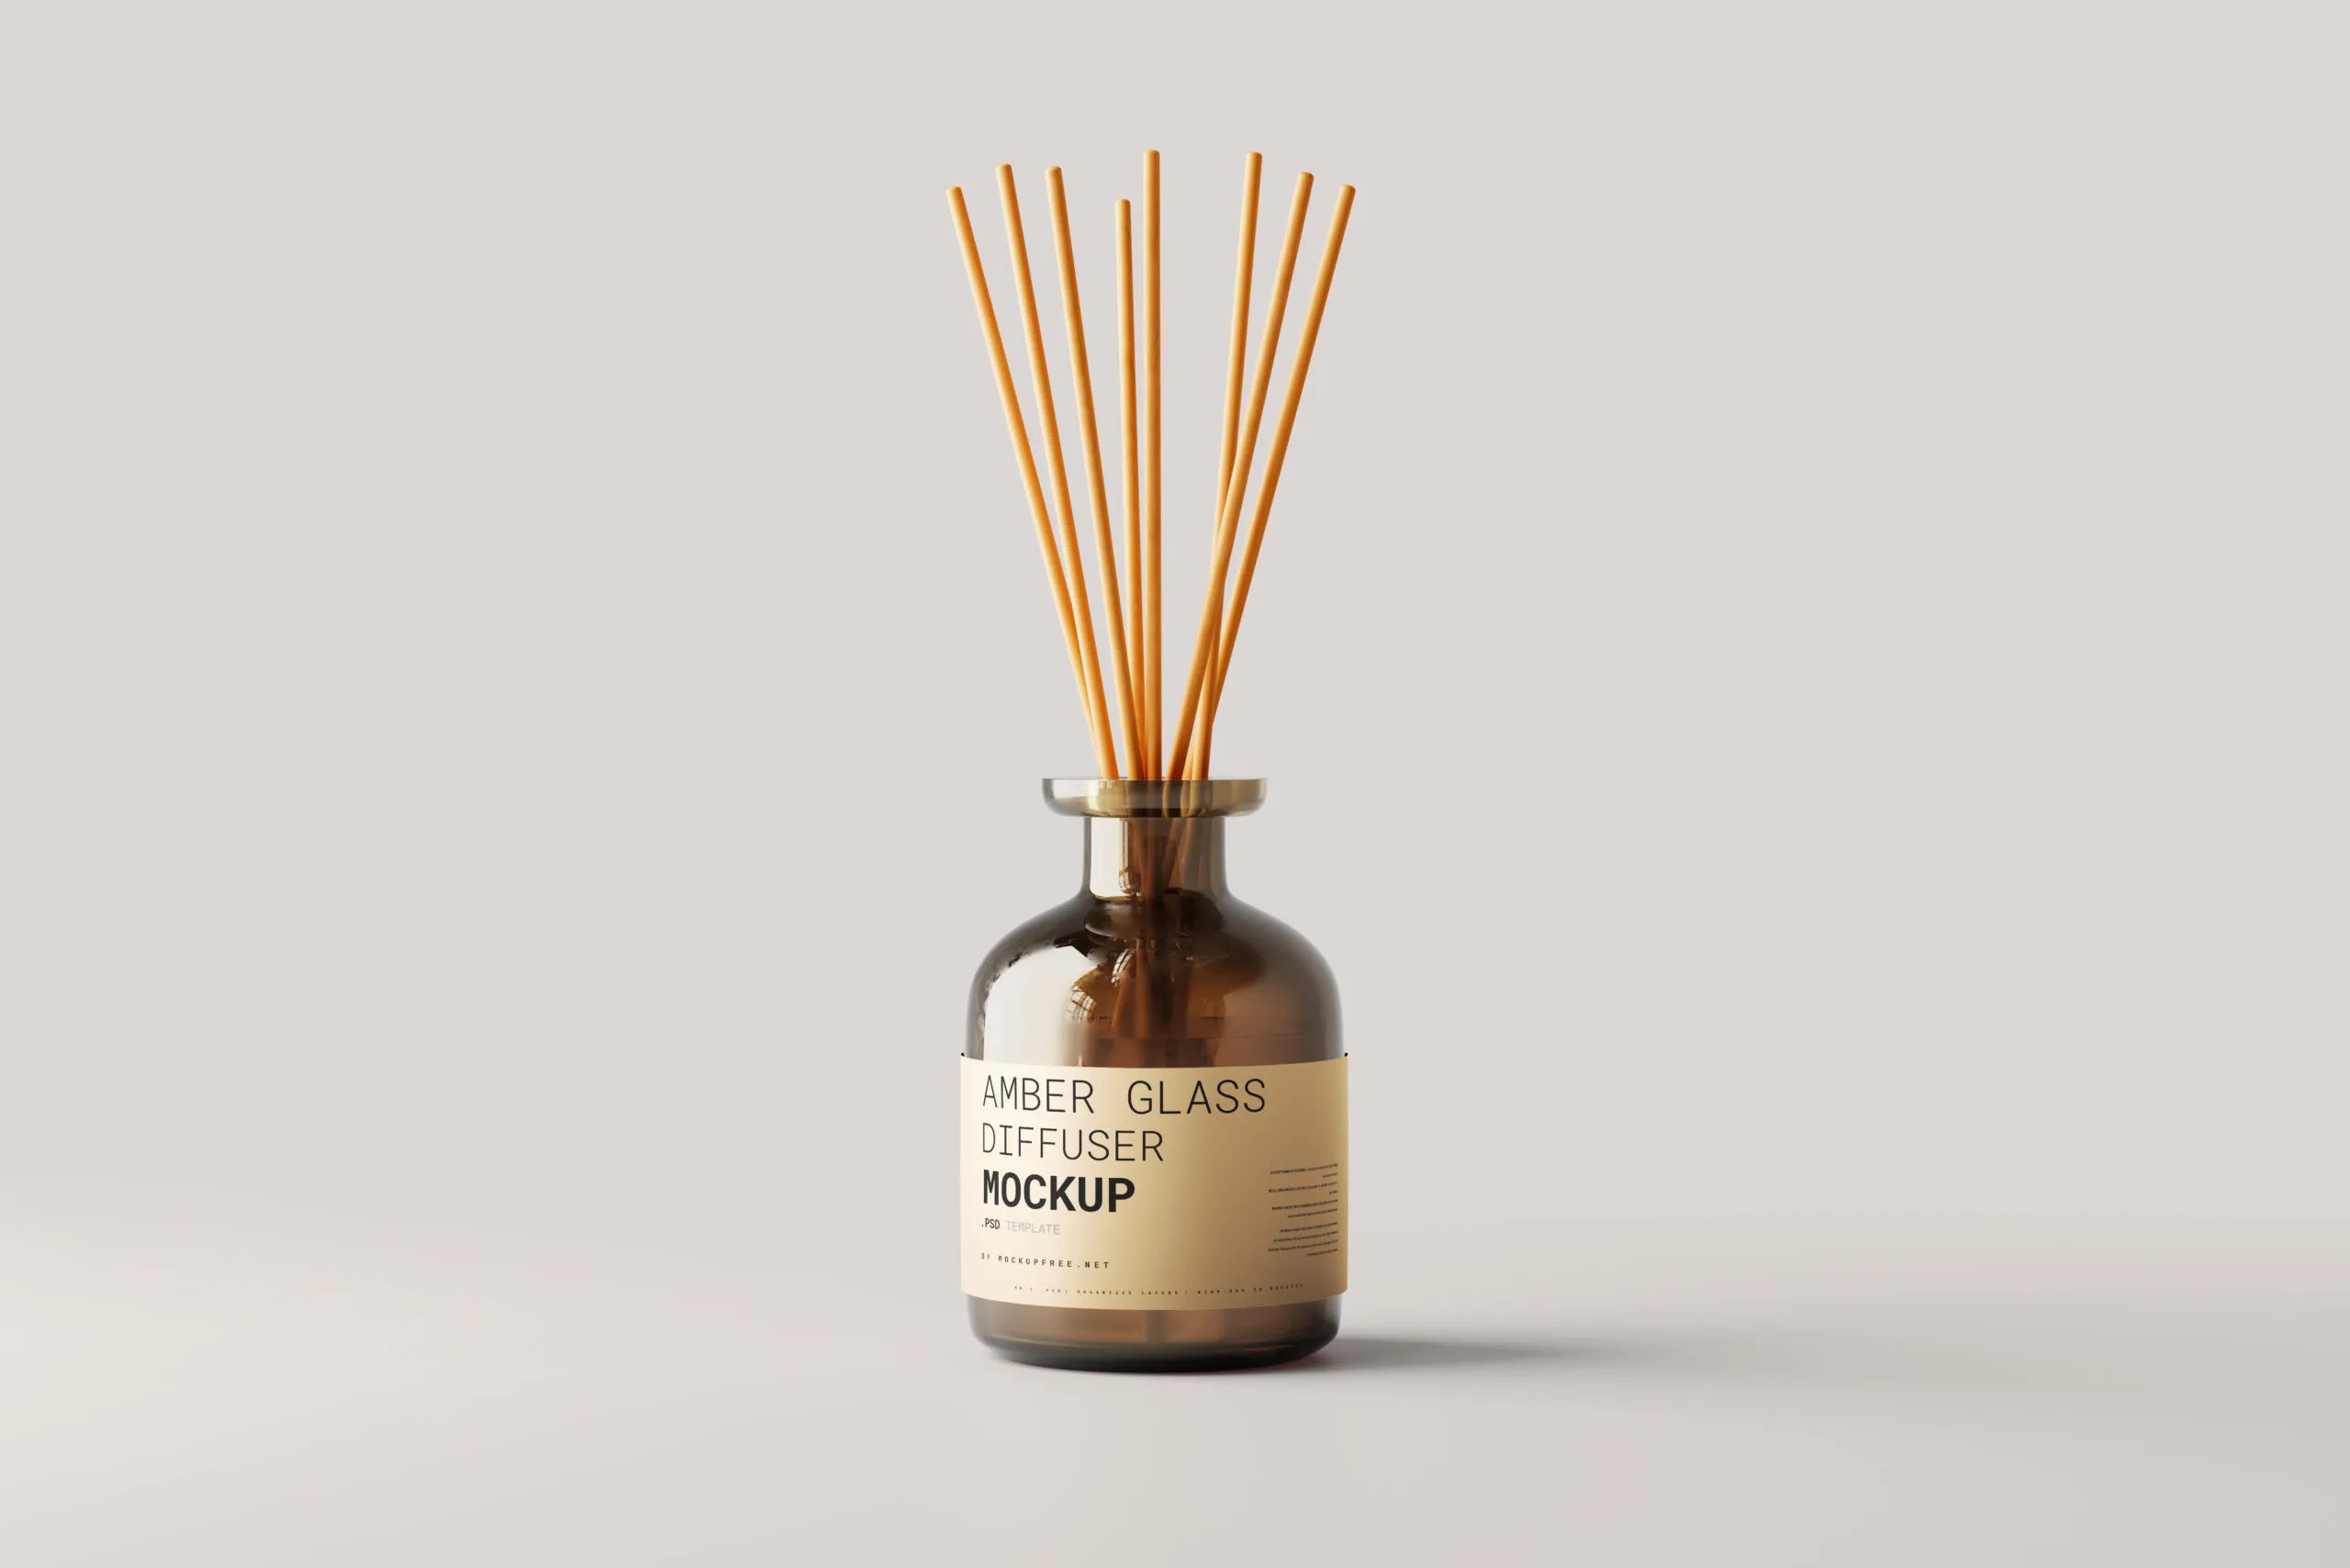 5 Amber Glass Reed Diffuser Mockups with Reeds FREE PSD